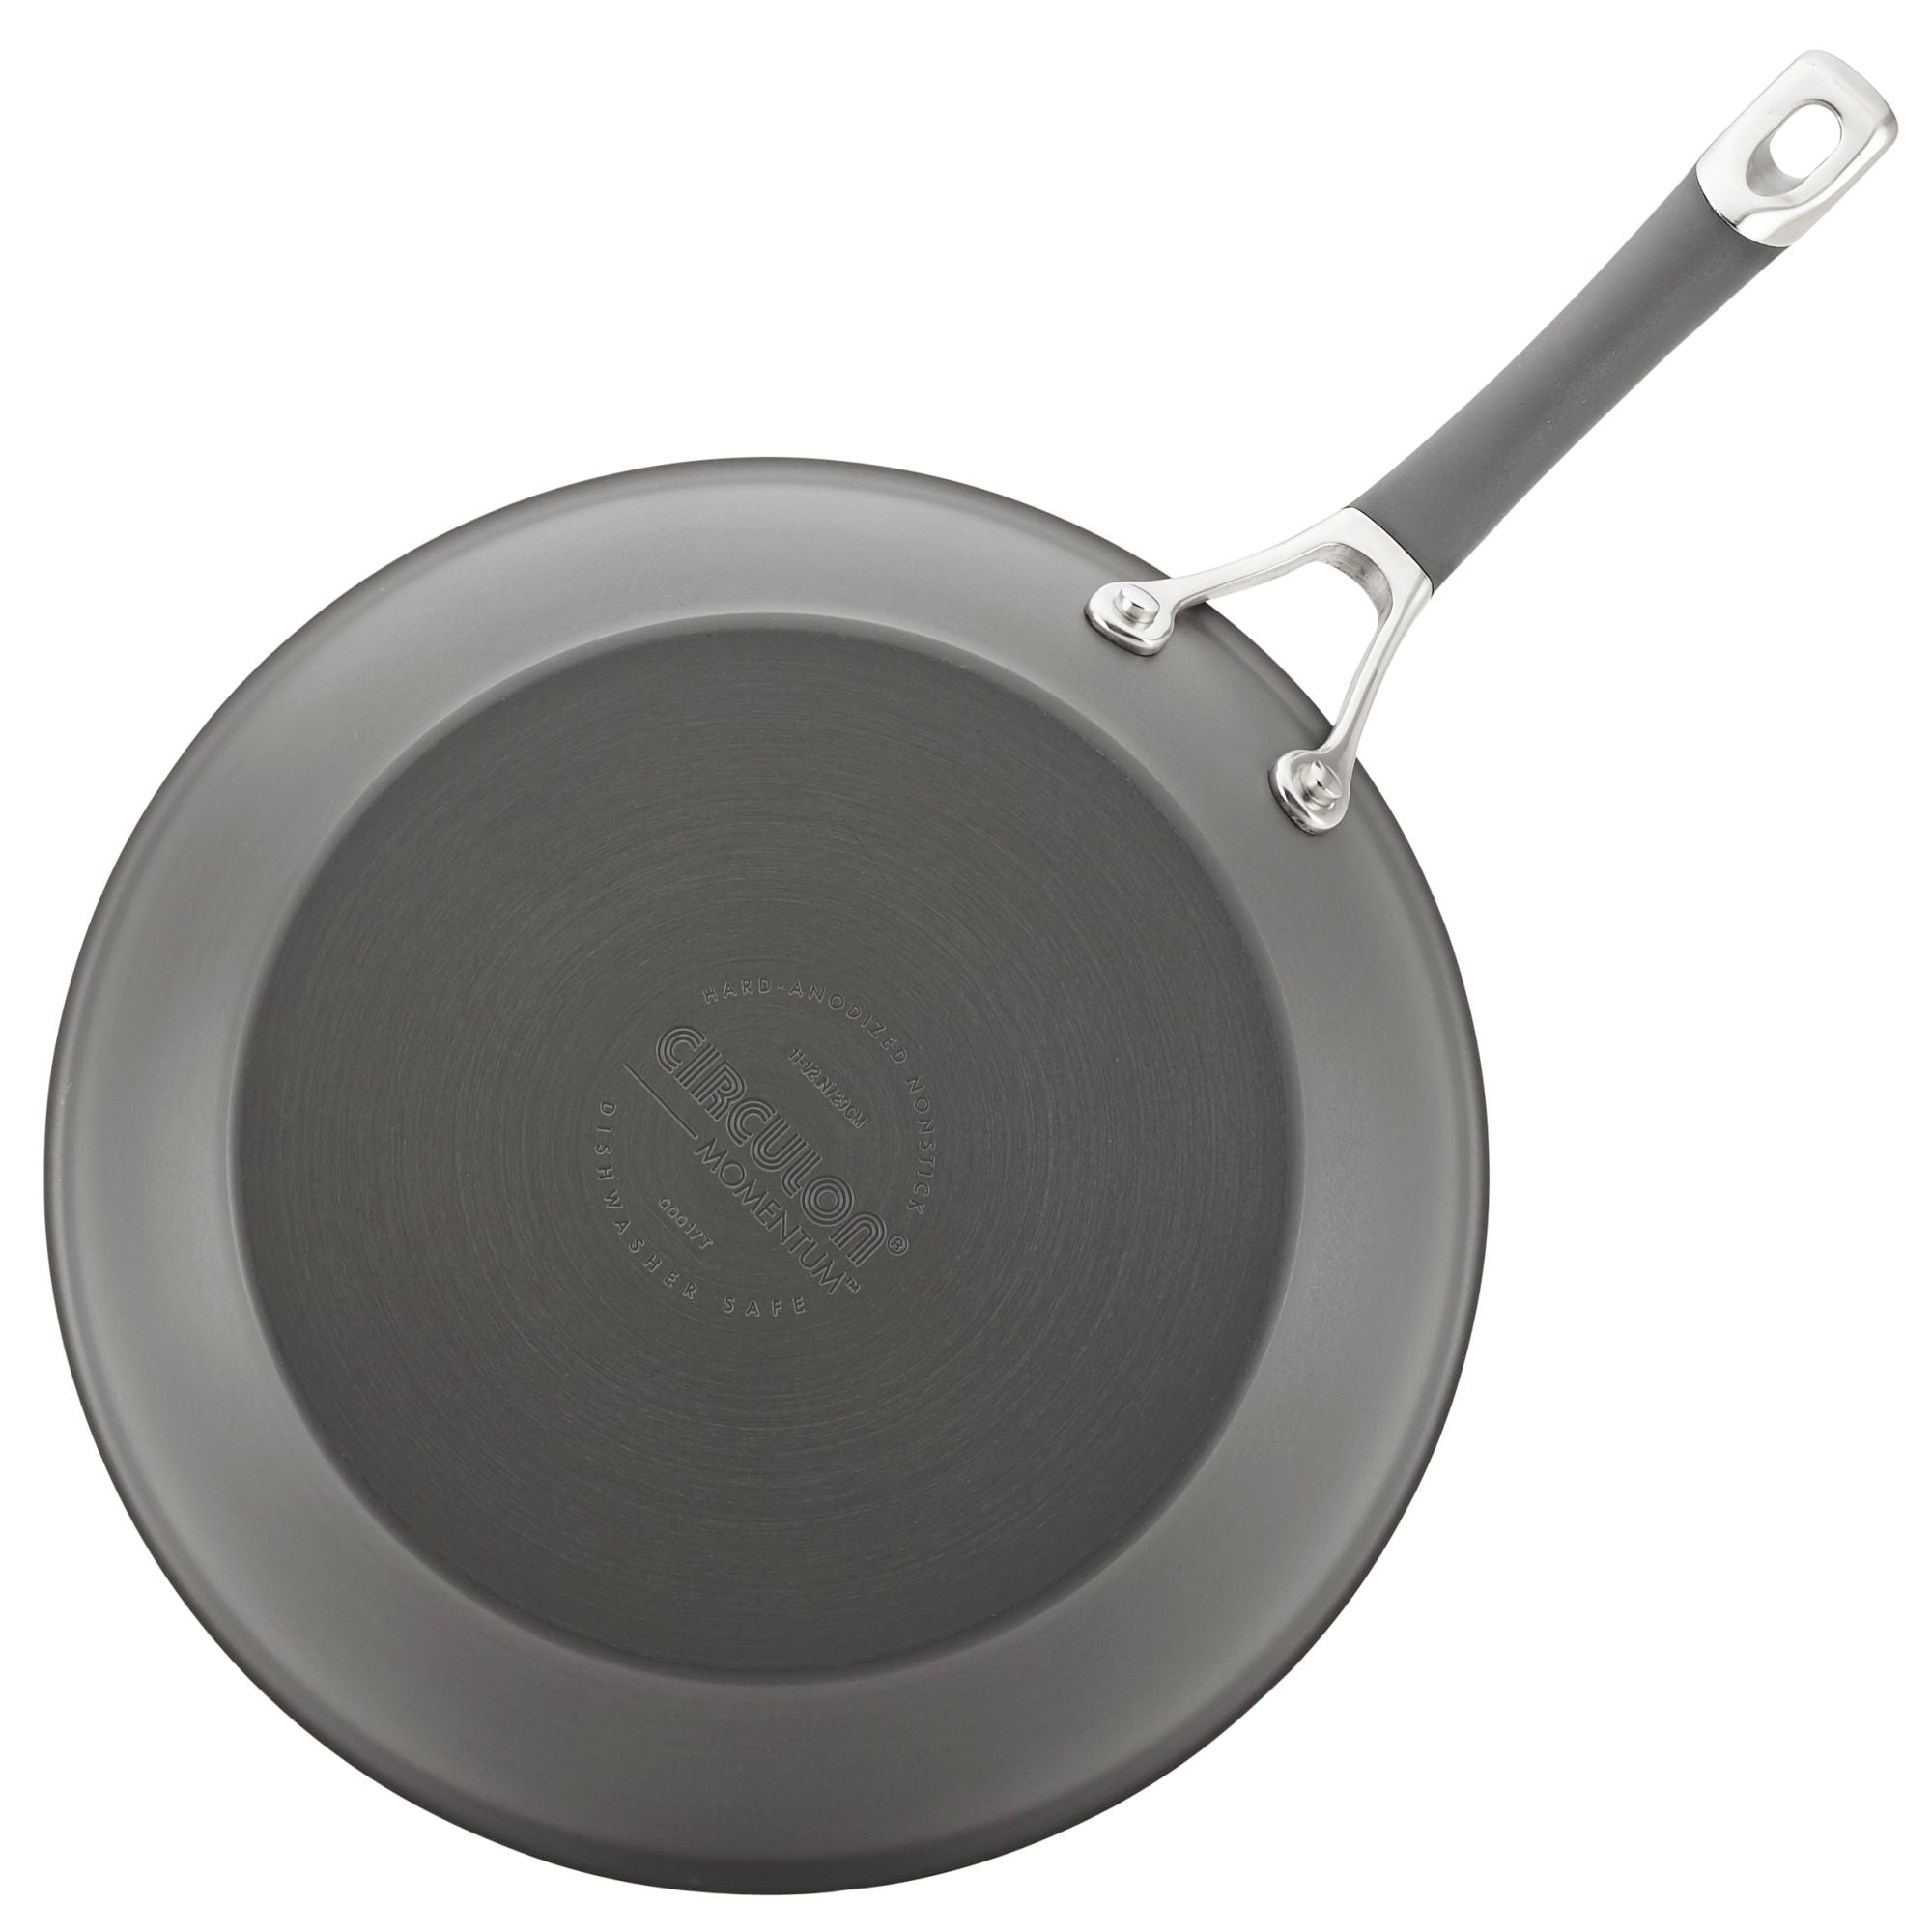 Circulon Elementum Hard-Anodized Nonstick Deep Frying Pan with Lid,  12-Inch, Gray